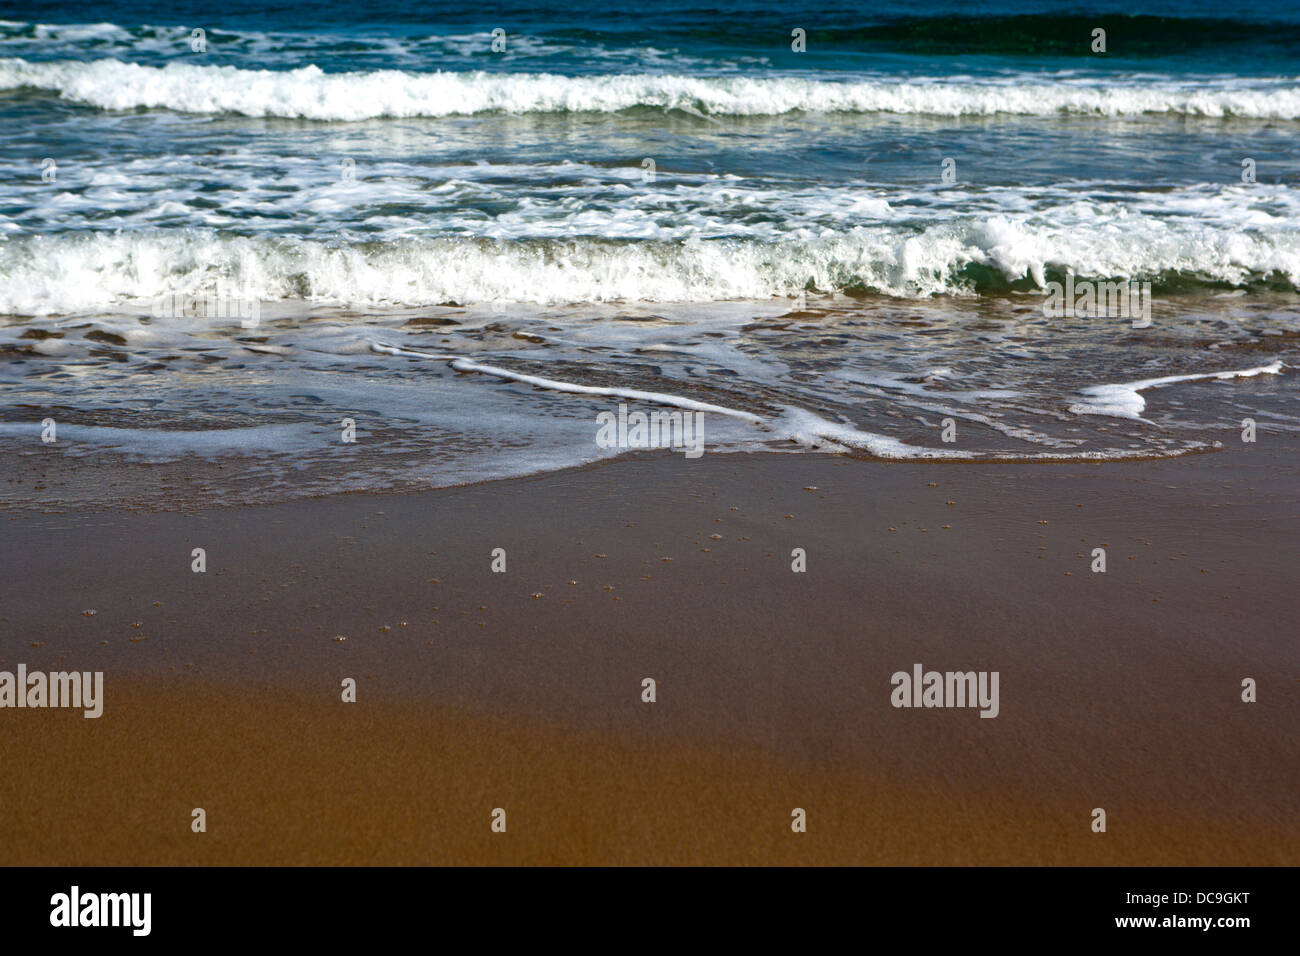 Shallow focus image of surf lapping onto a beach Stock Photo